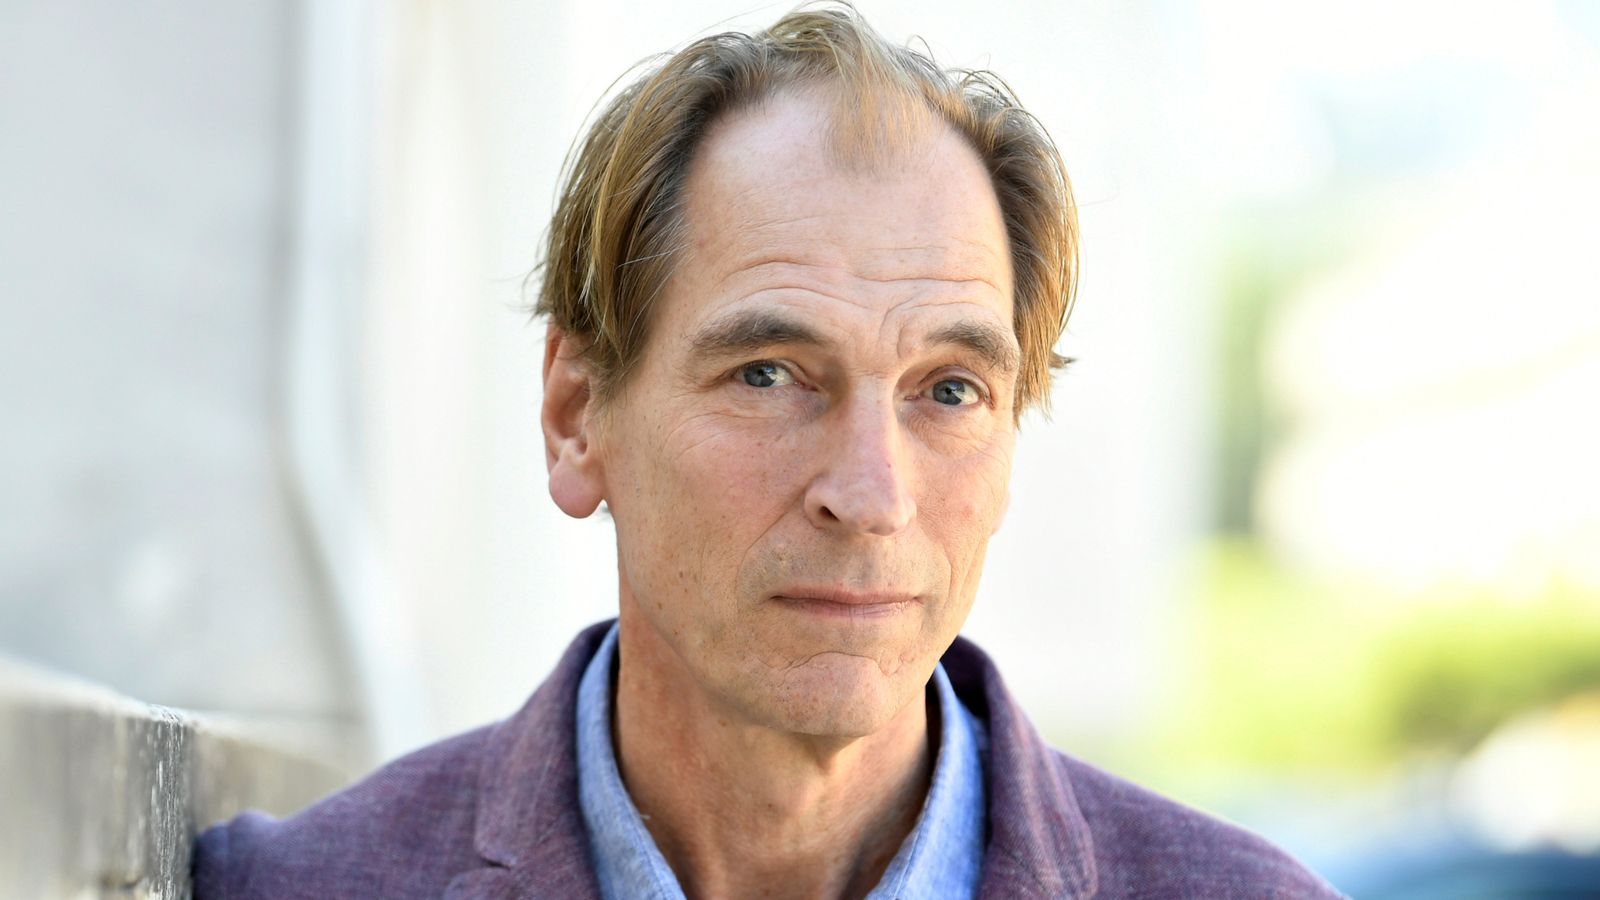 Julian Sands search: Human remains found in California mountains where actor disappeared